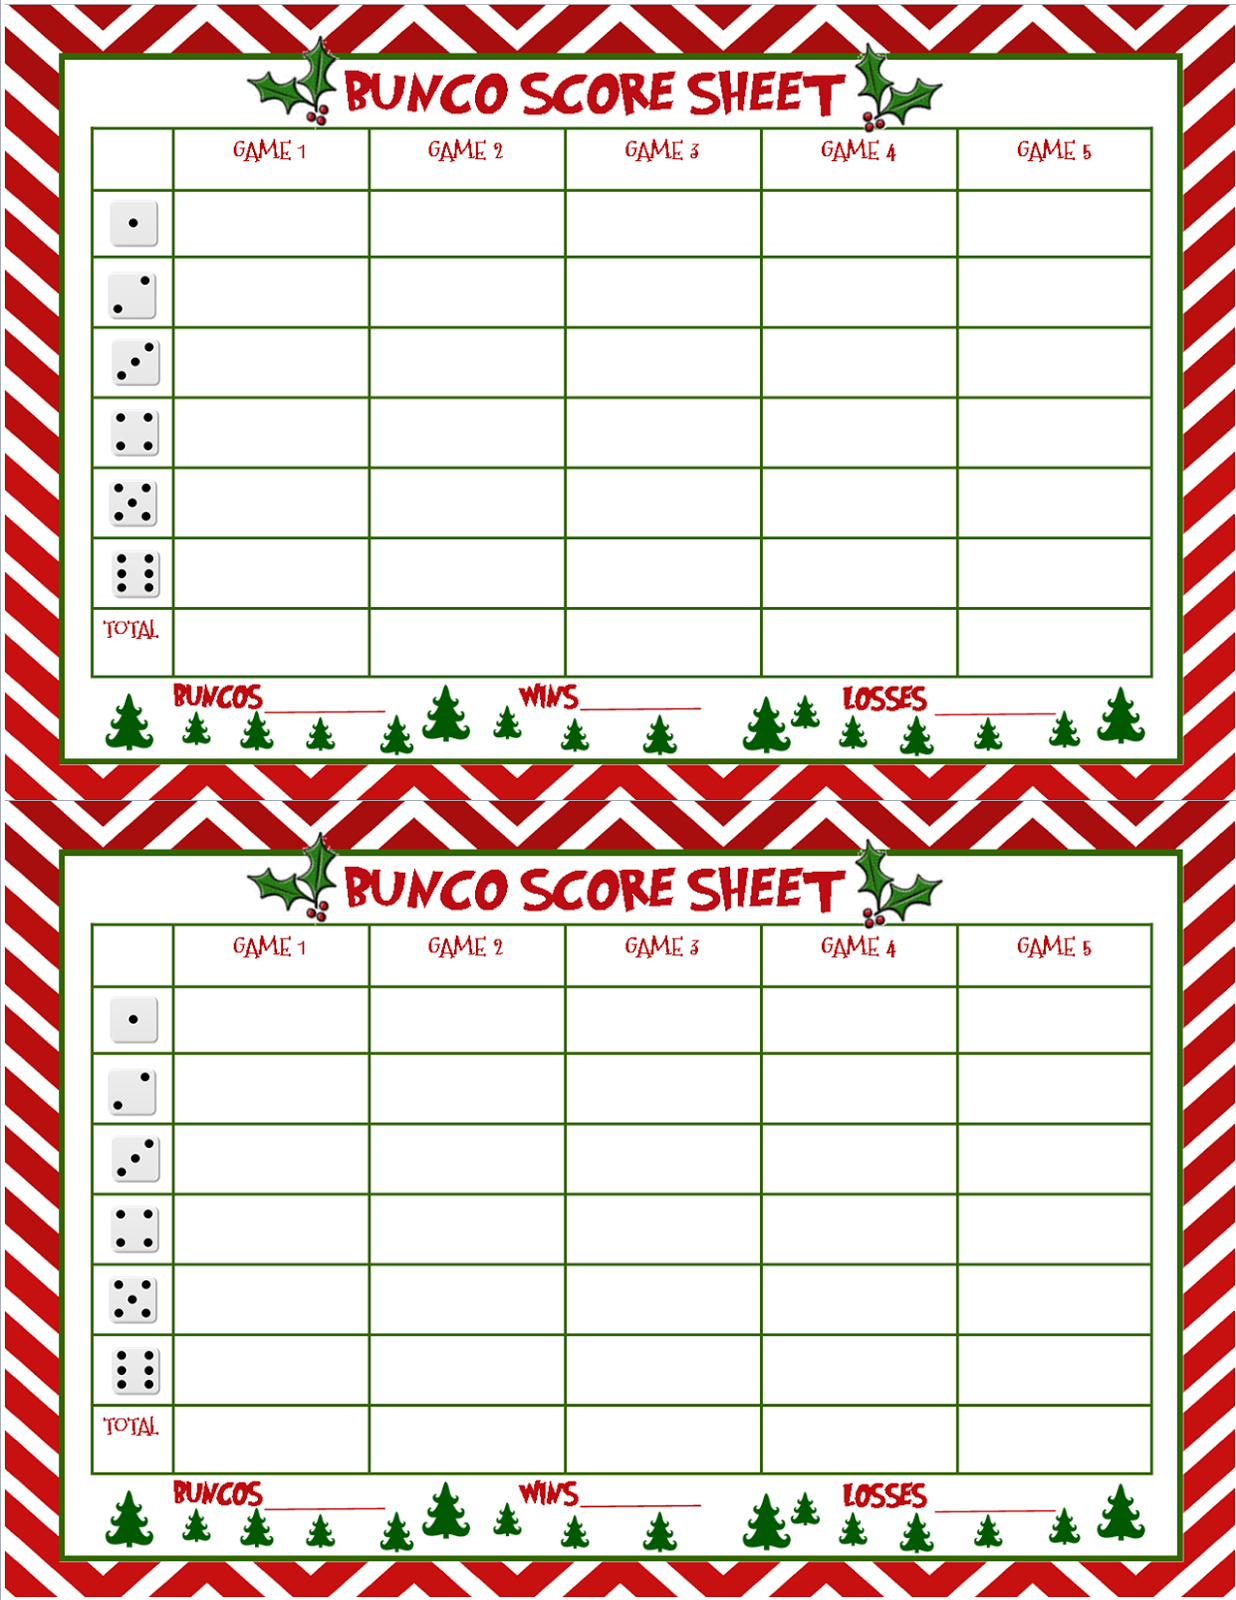 I Seemed To Have Skipped Making A Bunco Score Sheet For Thanksgiving - Free Printable Halloween Bunco Score Sheets